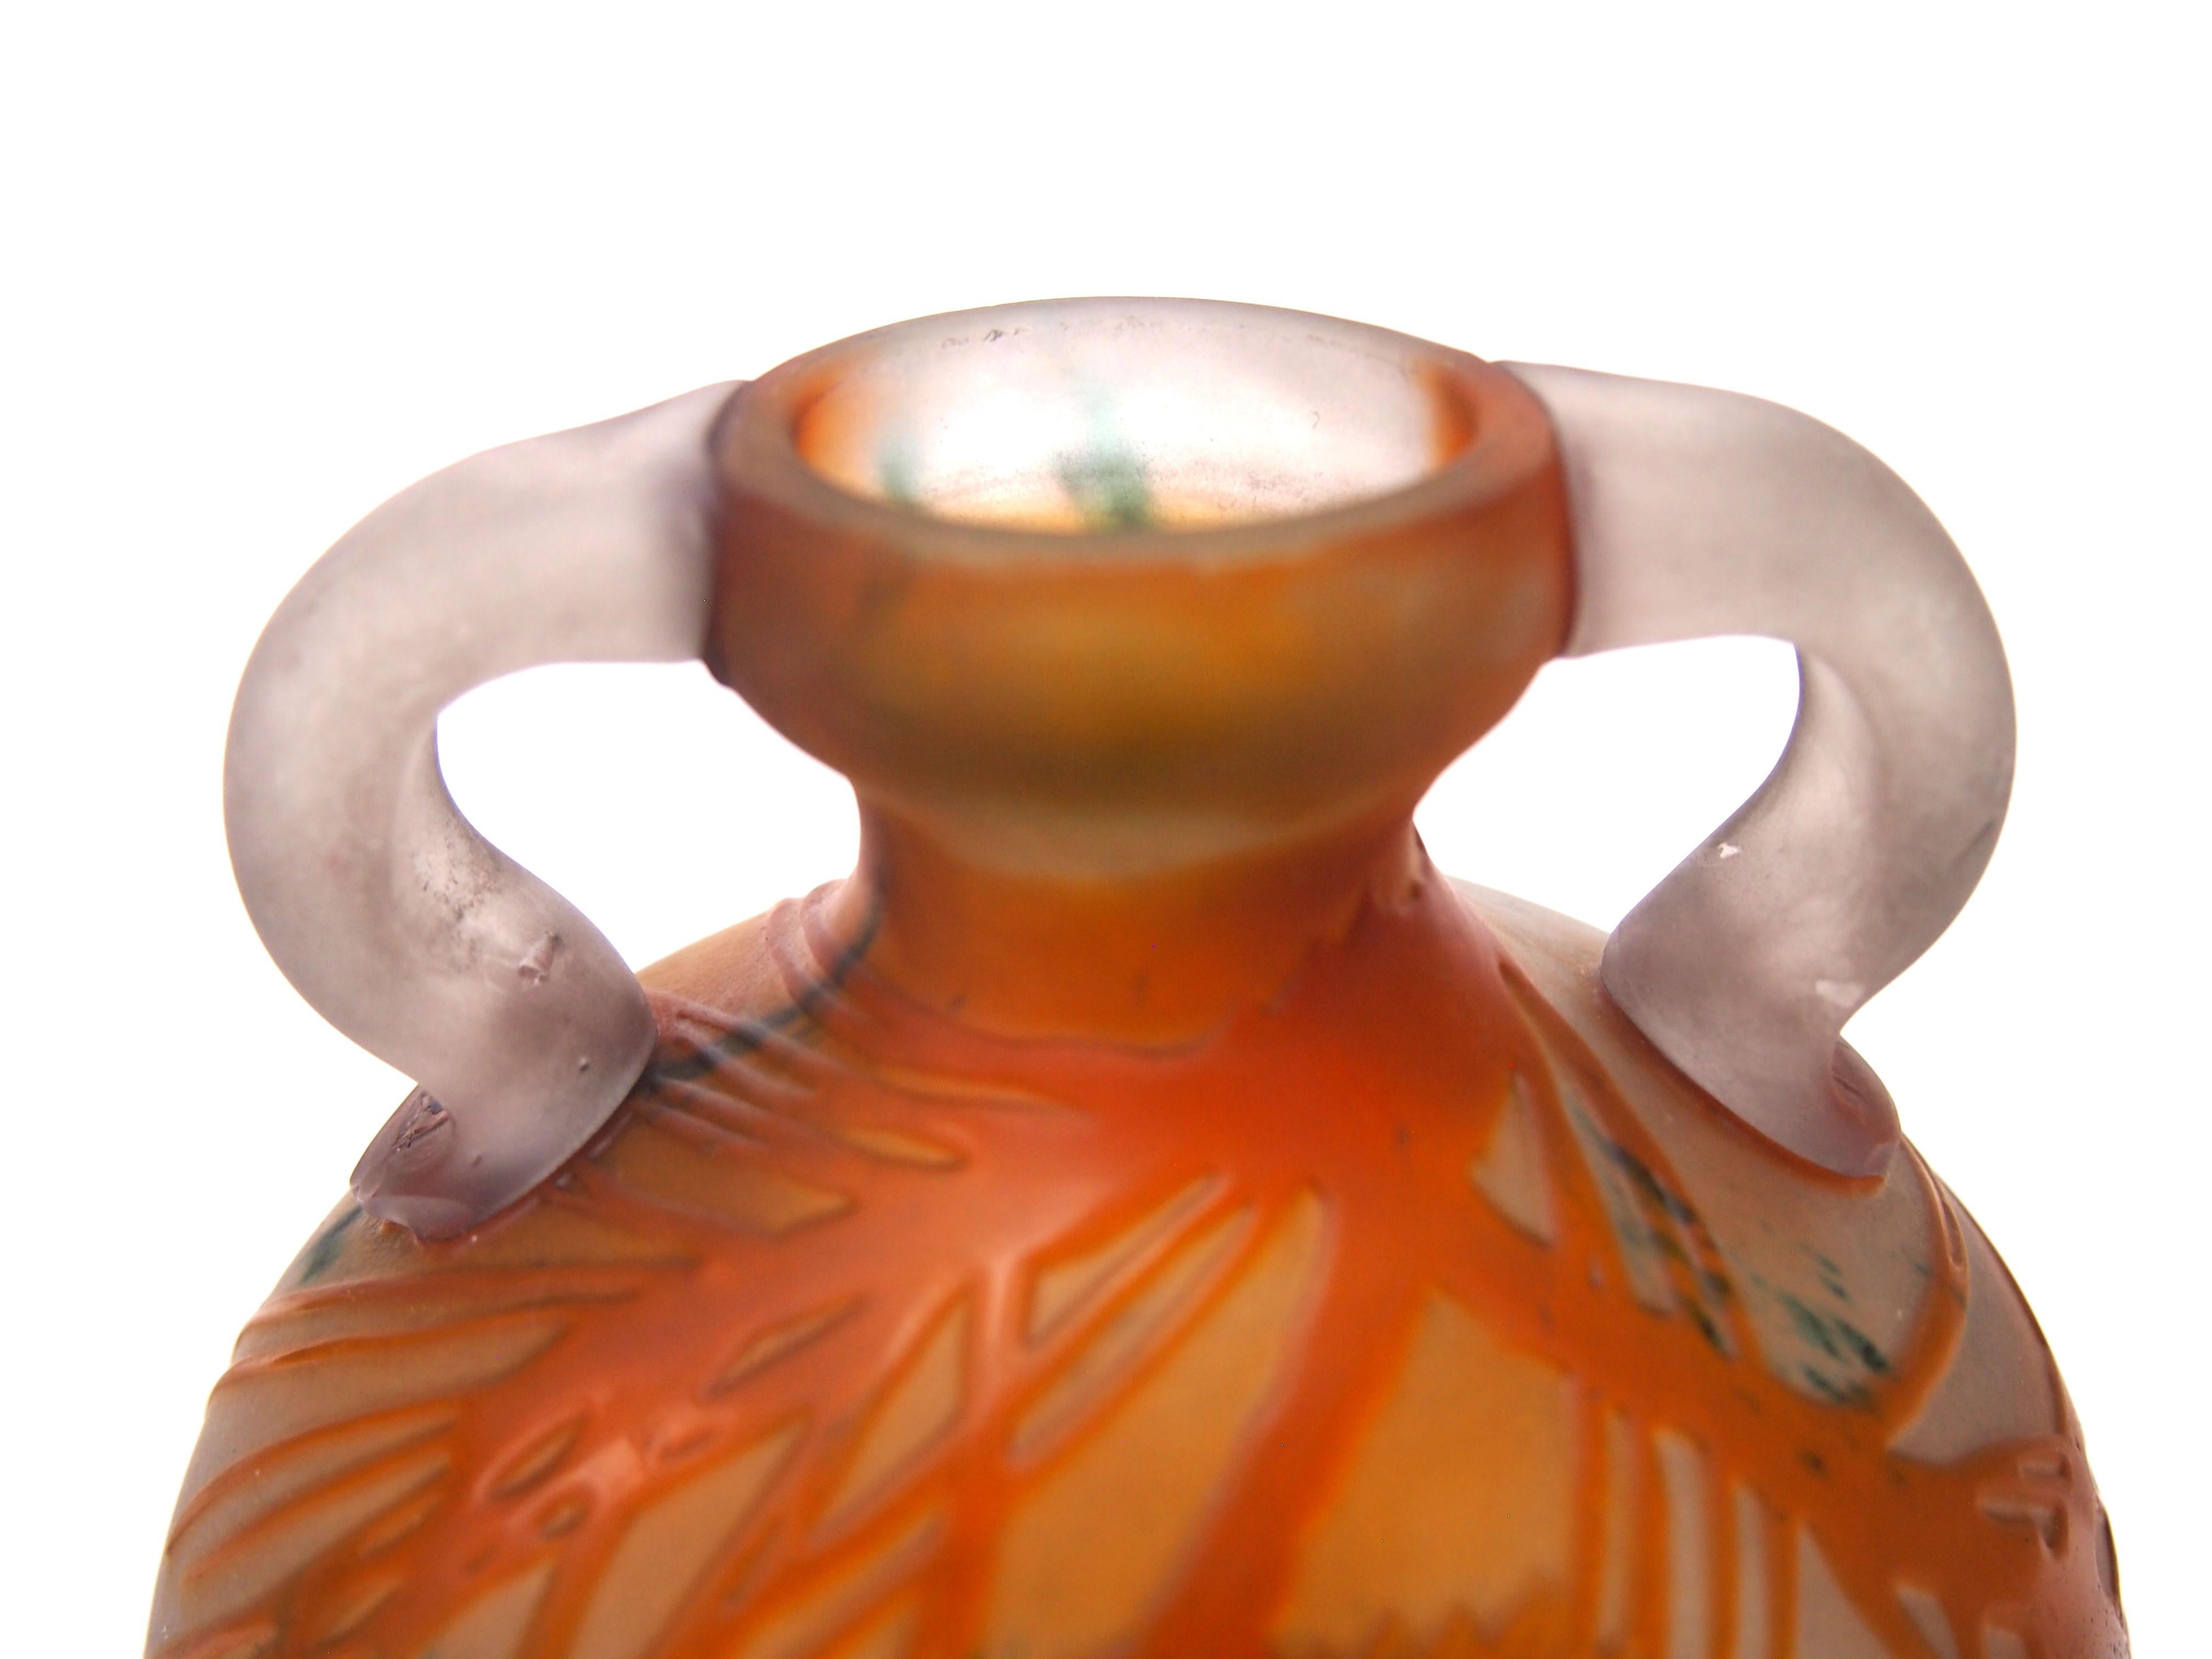 Exceptional French Art Nouveau Marbled Emile Galle Cameo Glass Vase -Fircones  For Sale 1